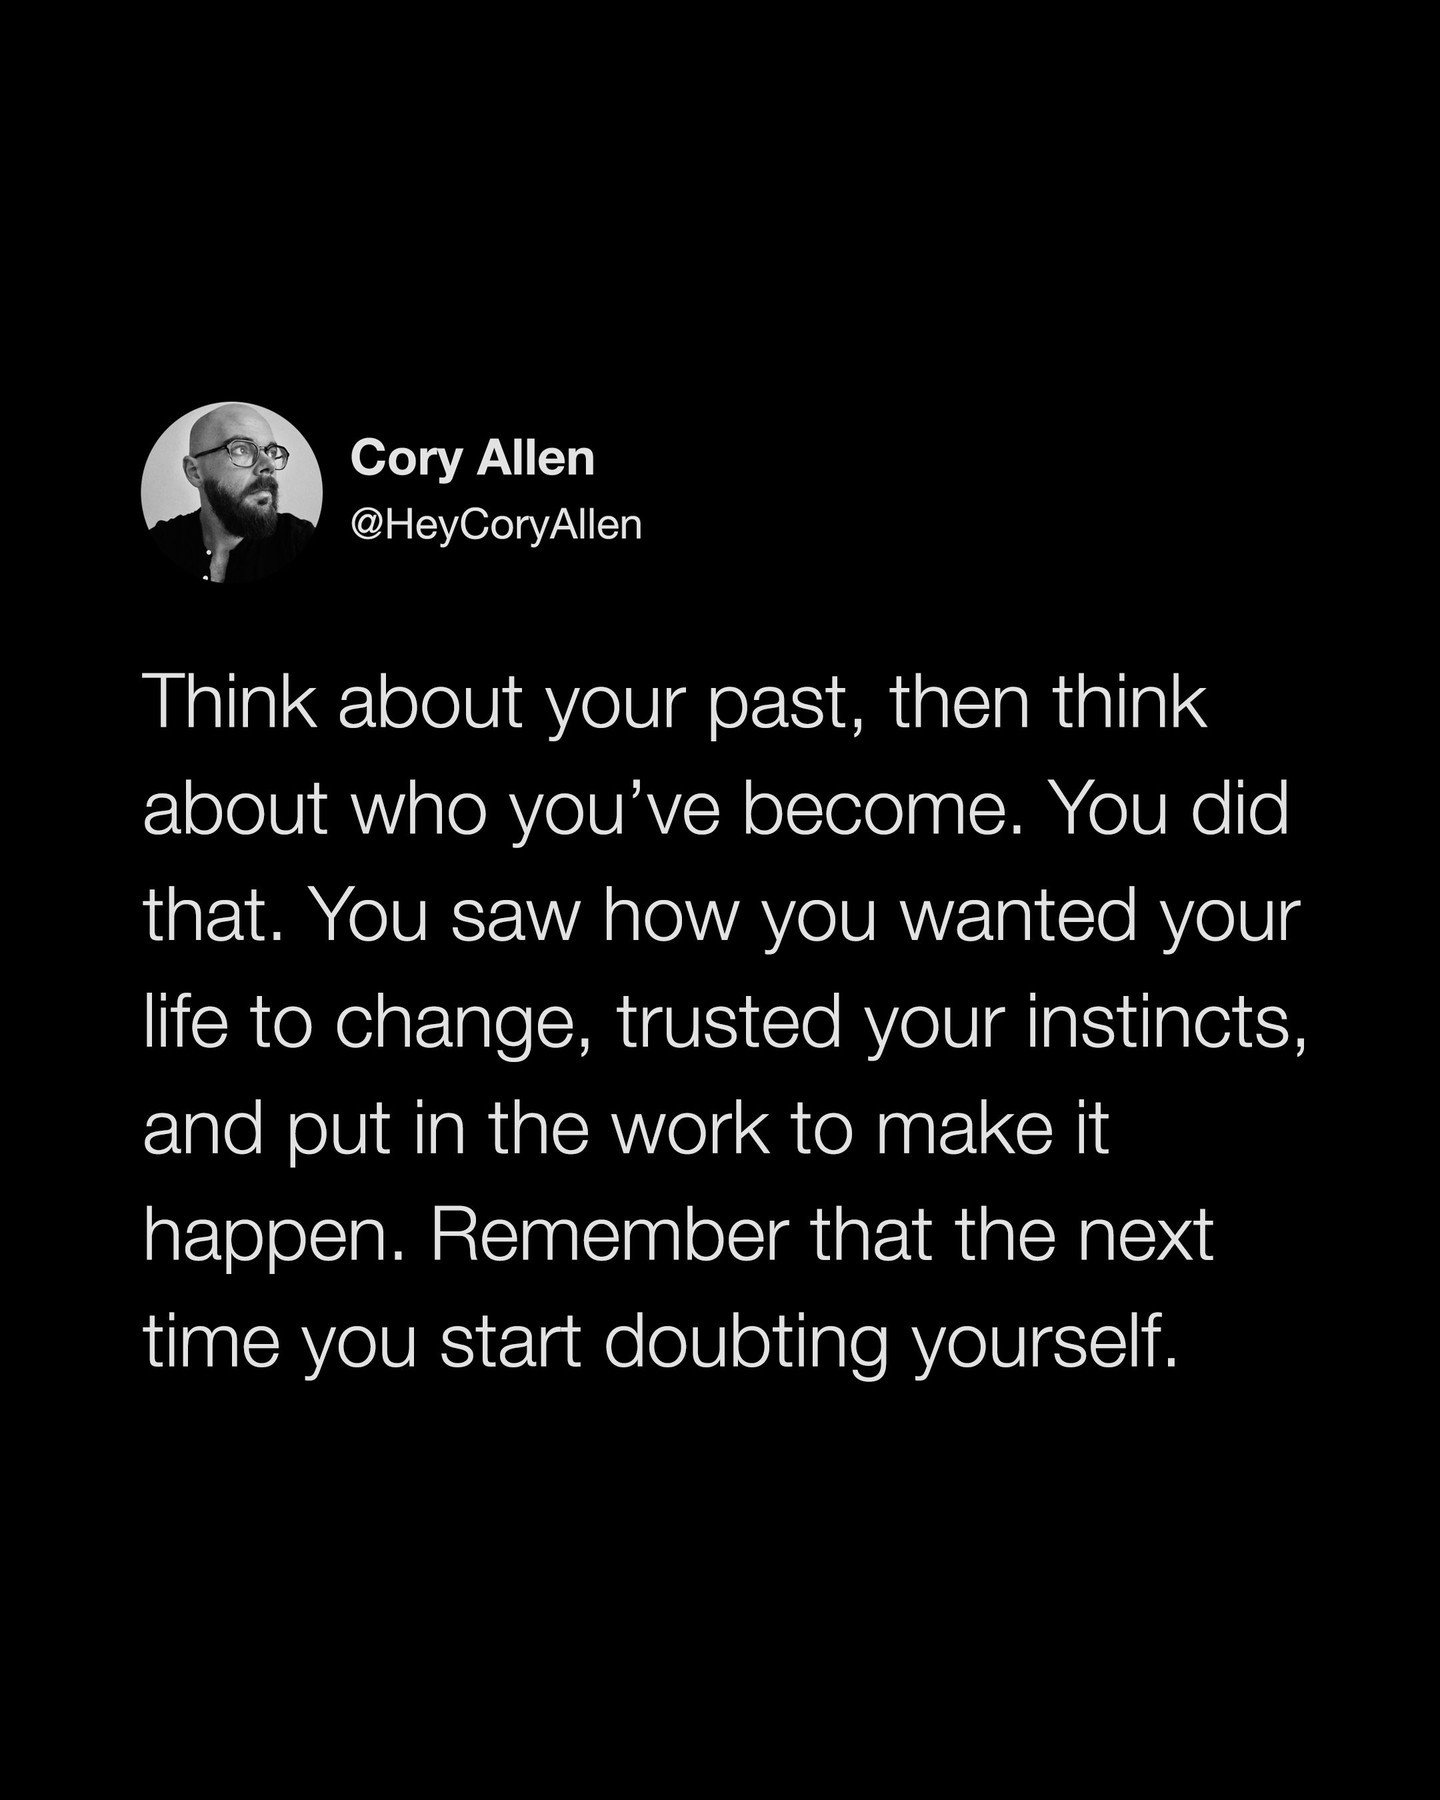 Remember this the next time you start doubting yourself 🖤 

@heycoryallen: Think about your past, then think about who you&rsquo;ve become. You did that. You saw how you wanted your life to change, trusted your instinct, and put in the work to make 